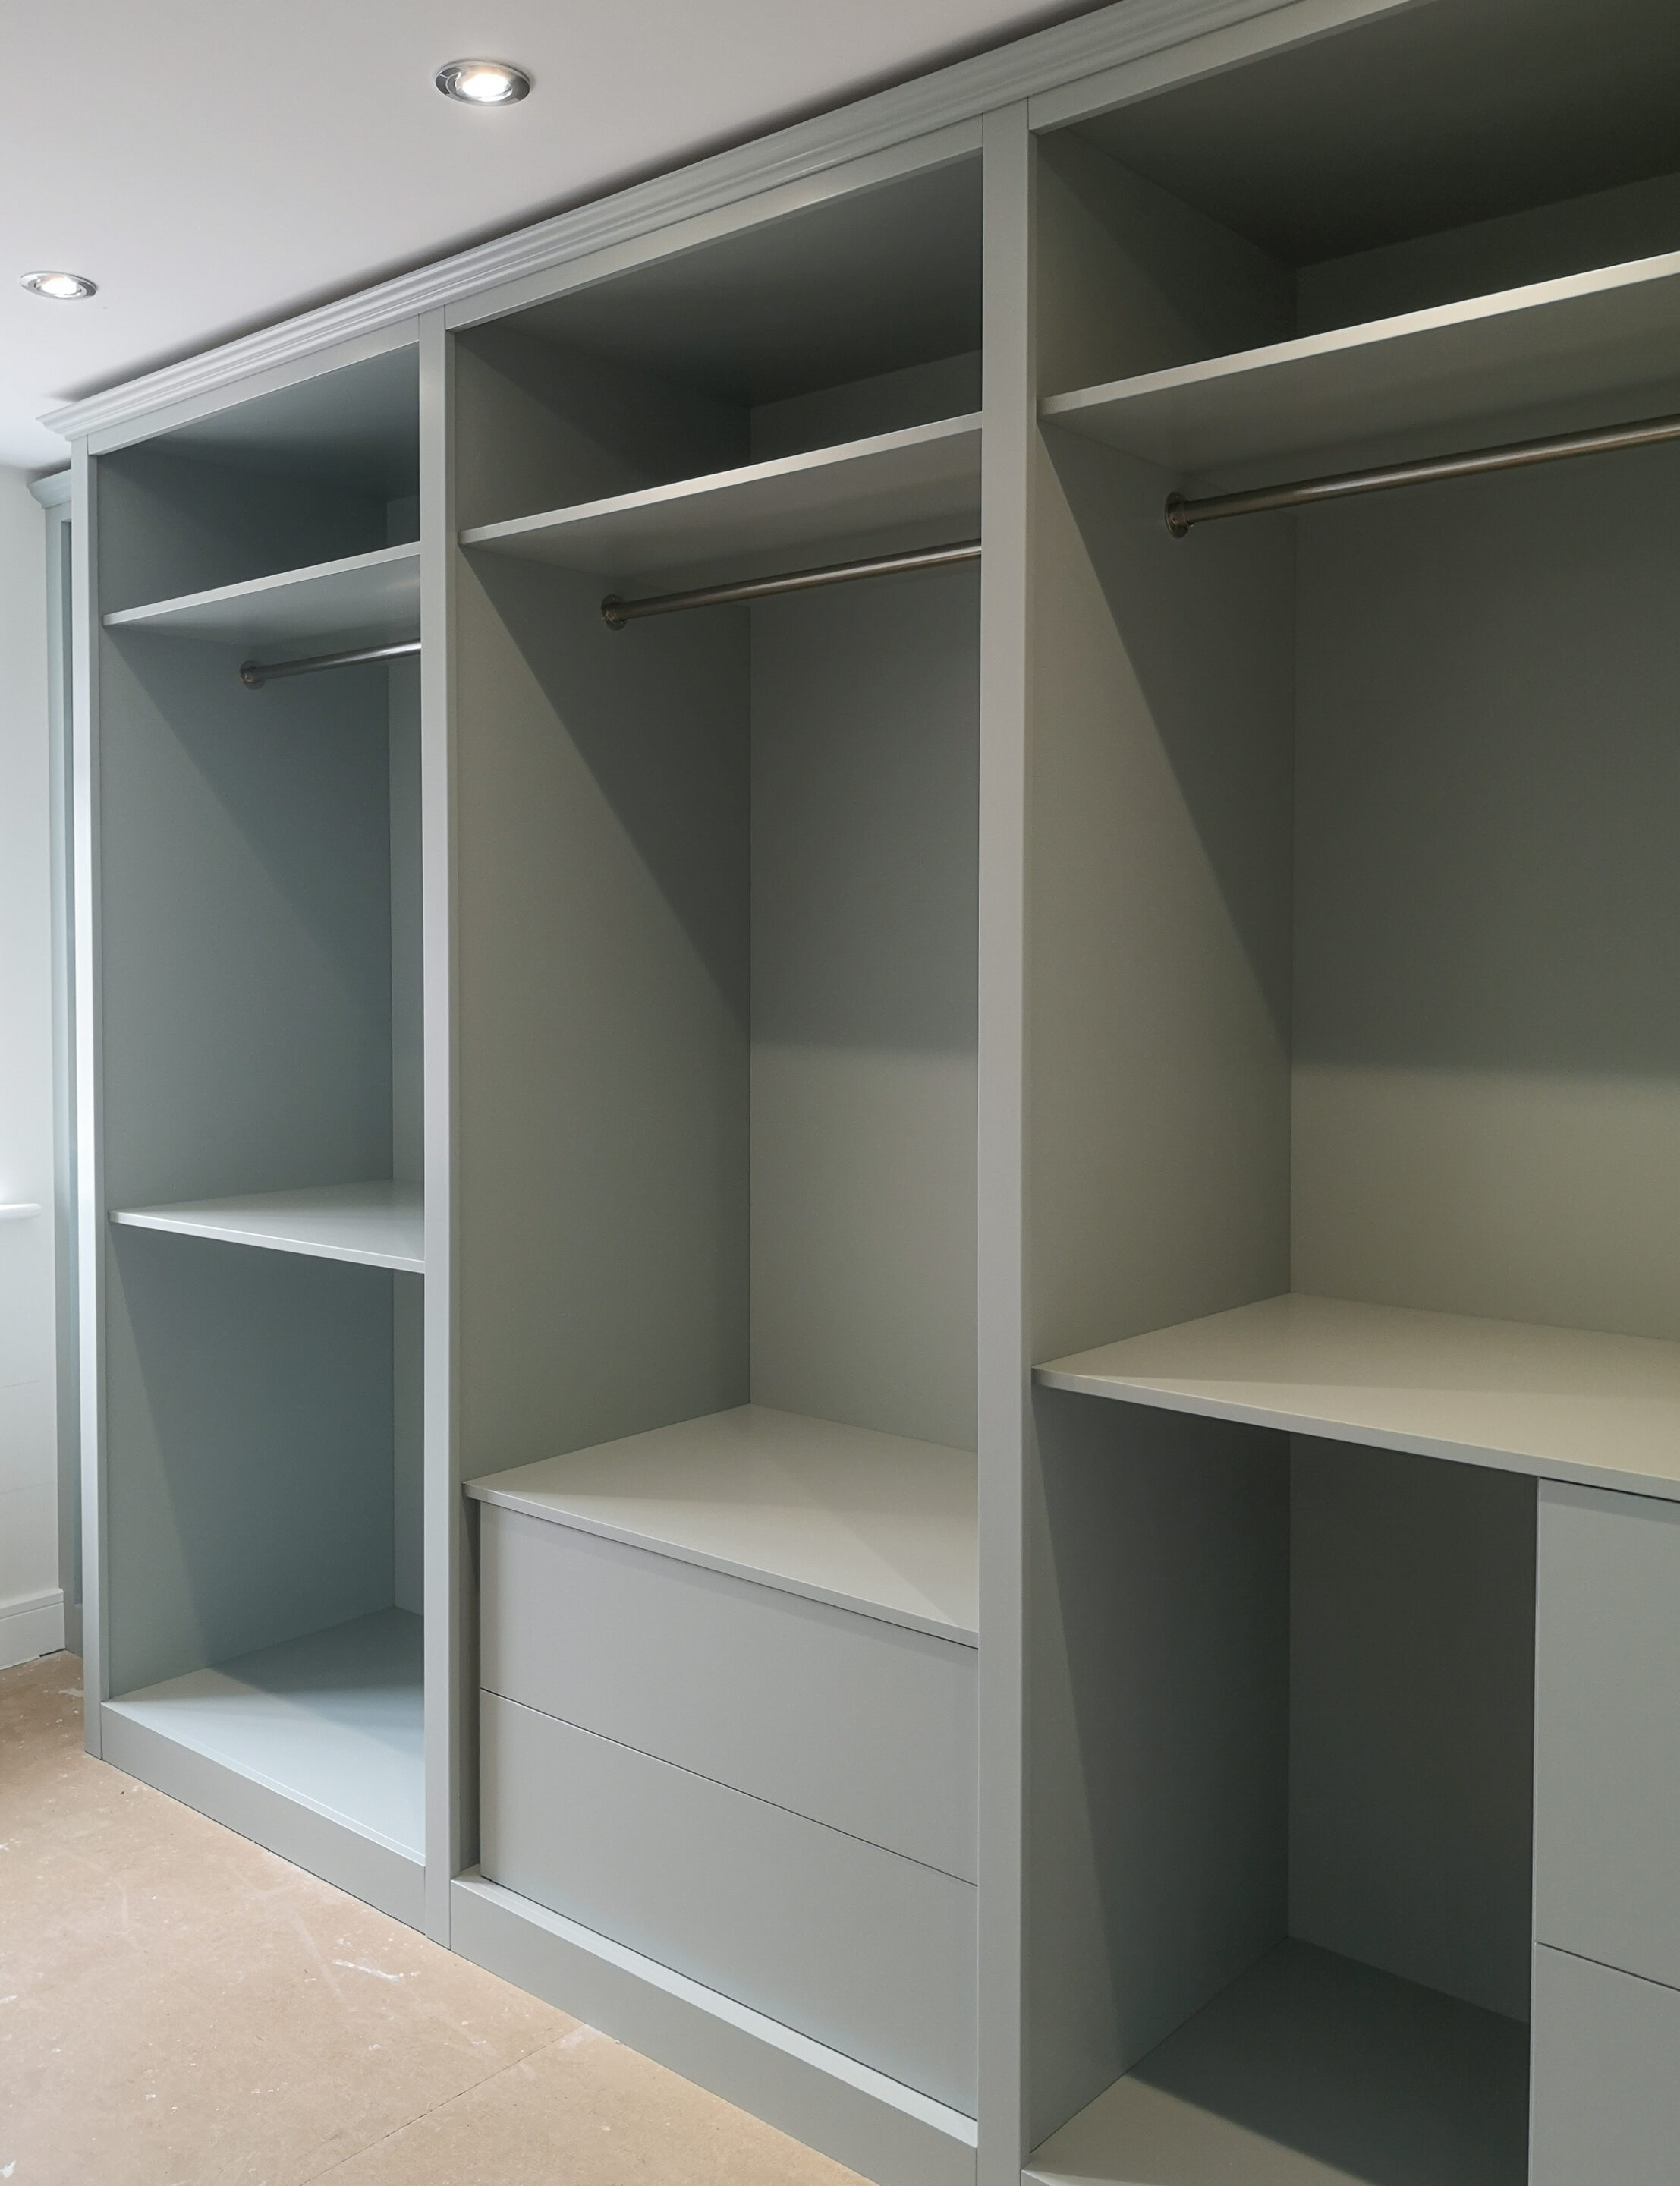 The picture shows the full length of the bespoke dressing room wardrobes, left open to showcase the clothing. Fitted with a combination of hanging rails at different lengths and drawers.